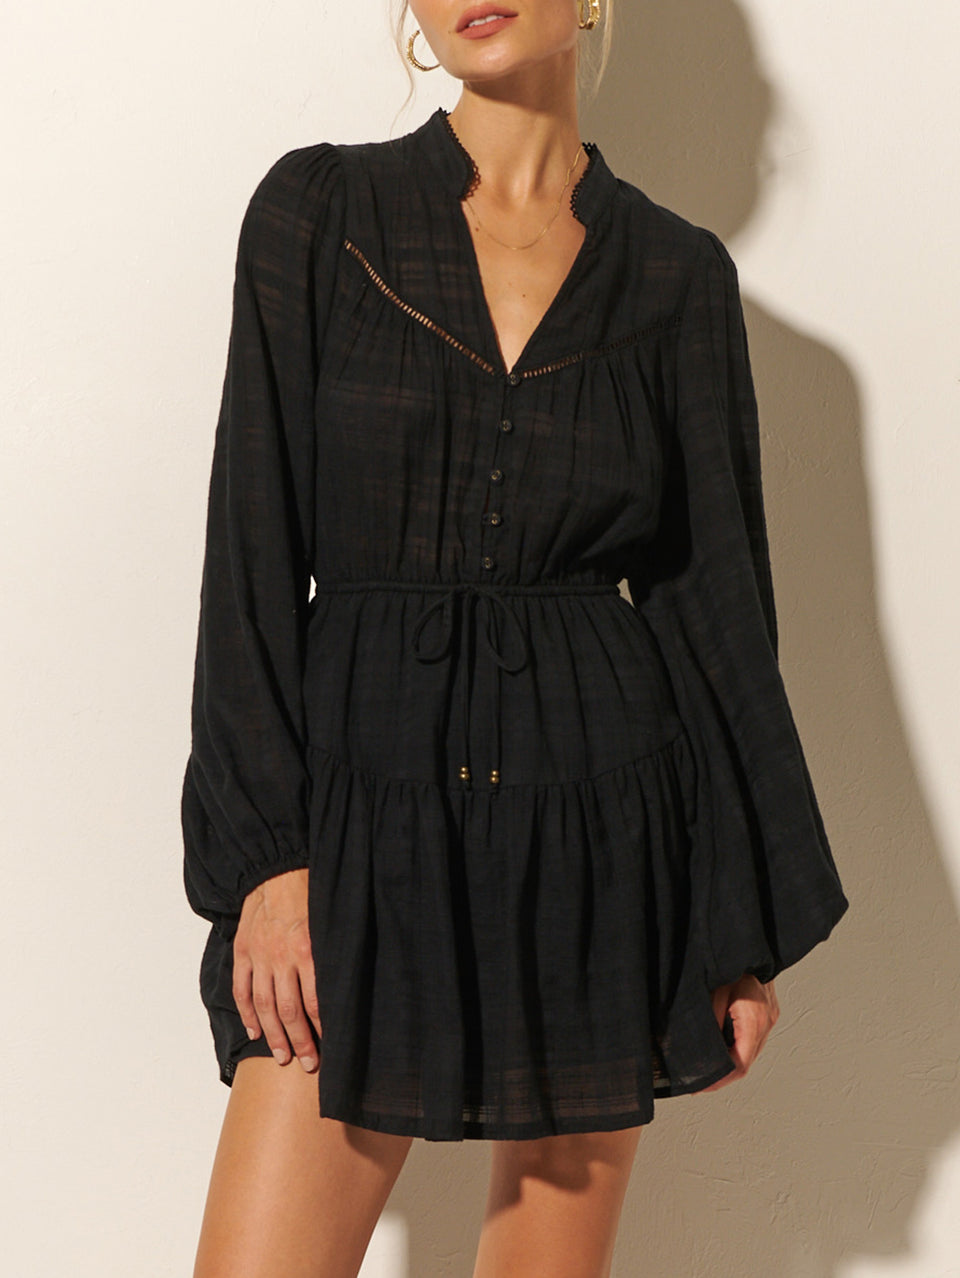 Close up: Studio model wears the KIVARI Rafaelle Mini Dress: a black dress made from cotton check featuring a button-front bodice, full-length blouson sleeves, drawstring waist and gathered hem frill.